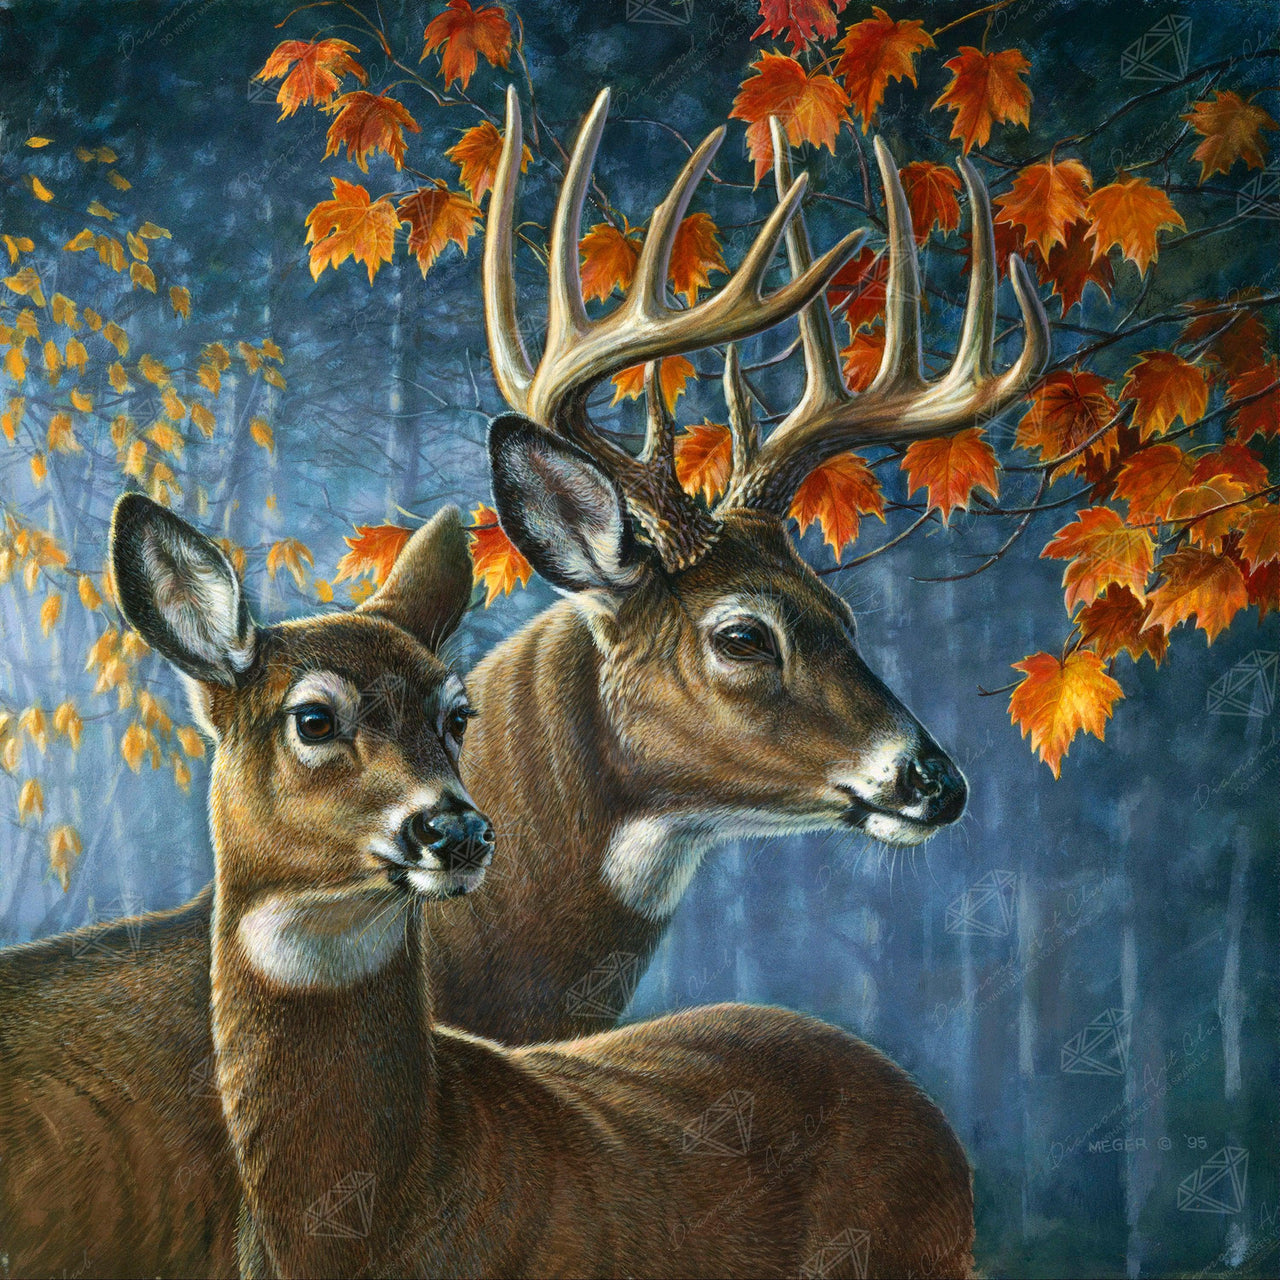 Diamond Painting Deer Pair 22" x 22" (55.8cm x 55.8cm) / Square with 30 Colors including 1 ABs and 2 Fairy Dust Diamonds / 50,176